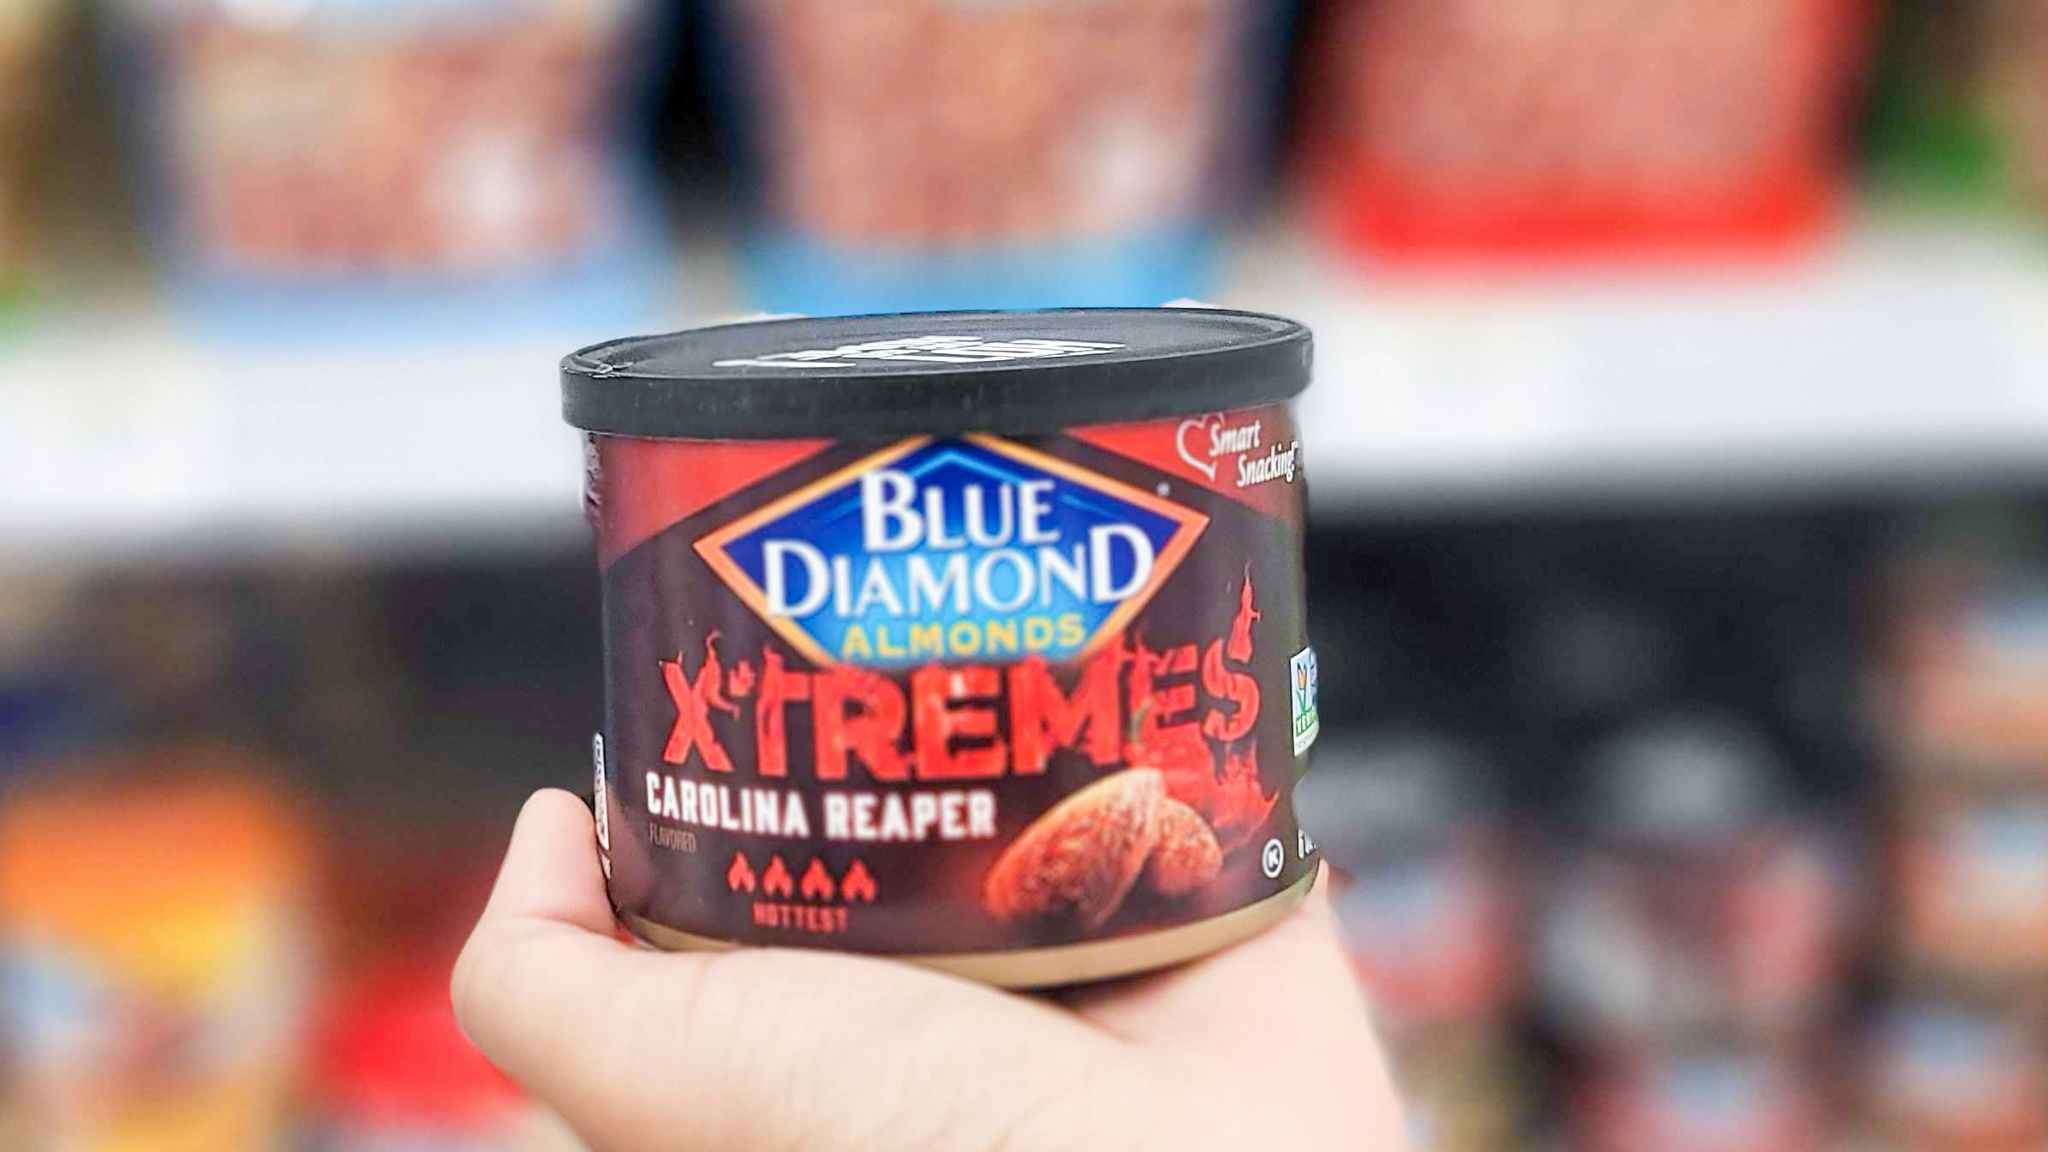 hand holding can of blue diamond almonds